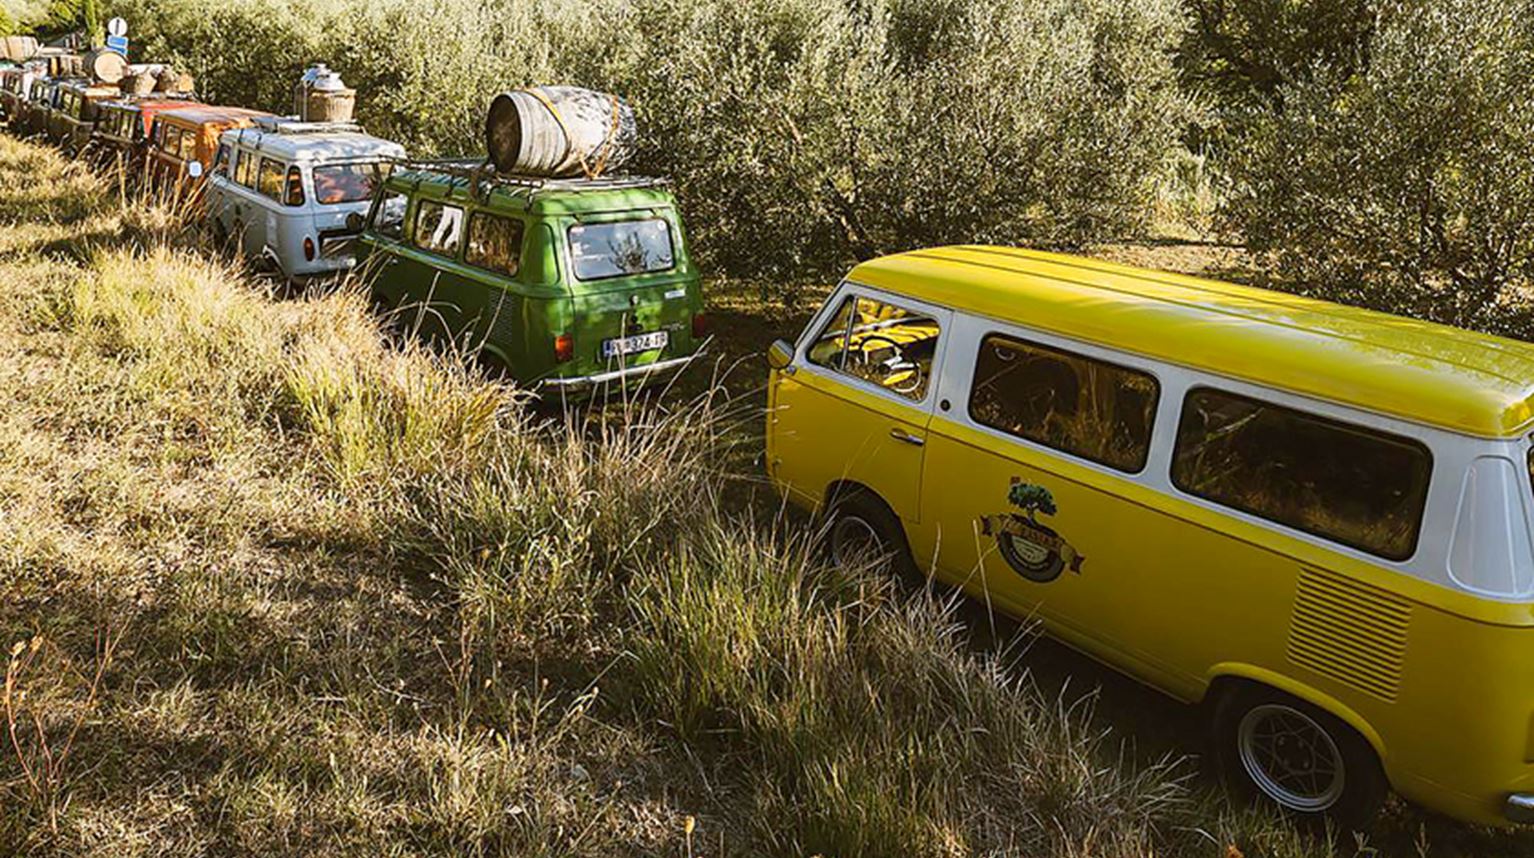 Colourful vintage vans going through a green field.